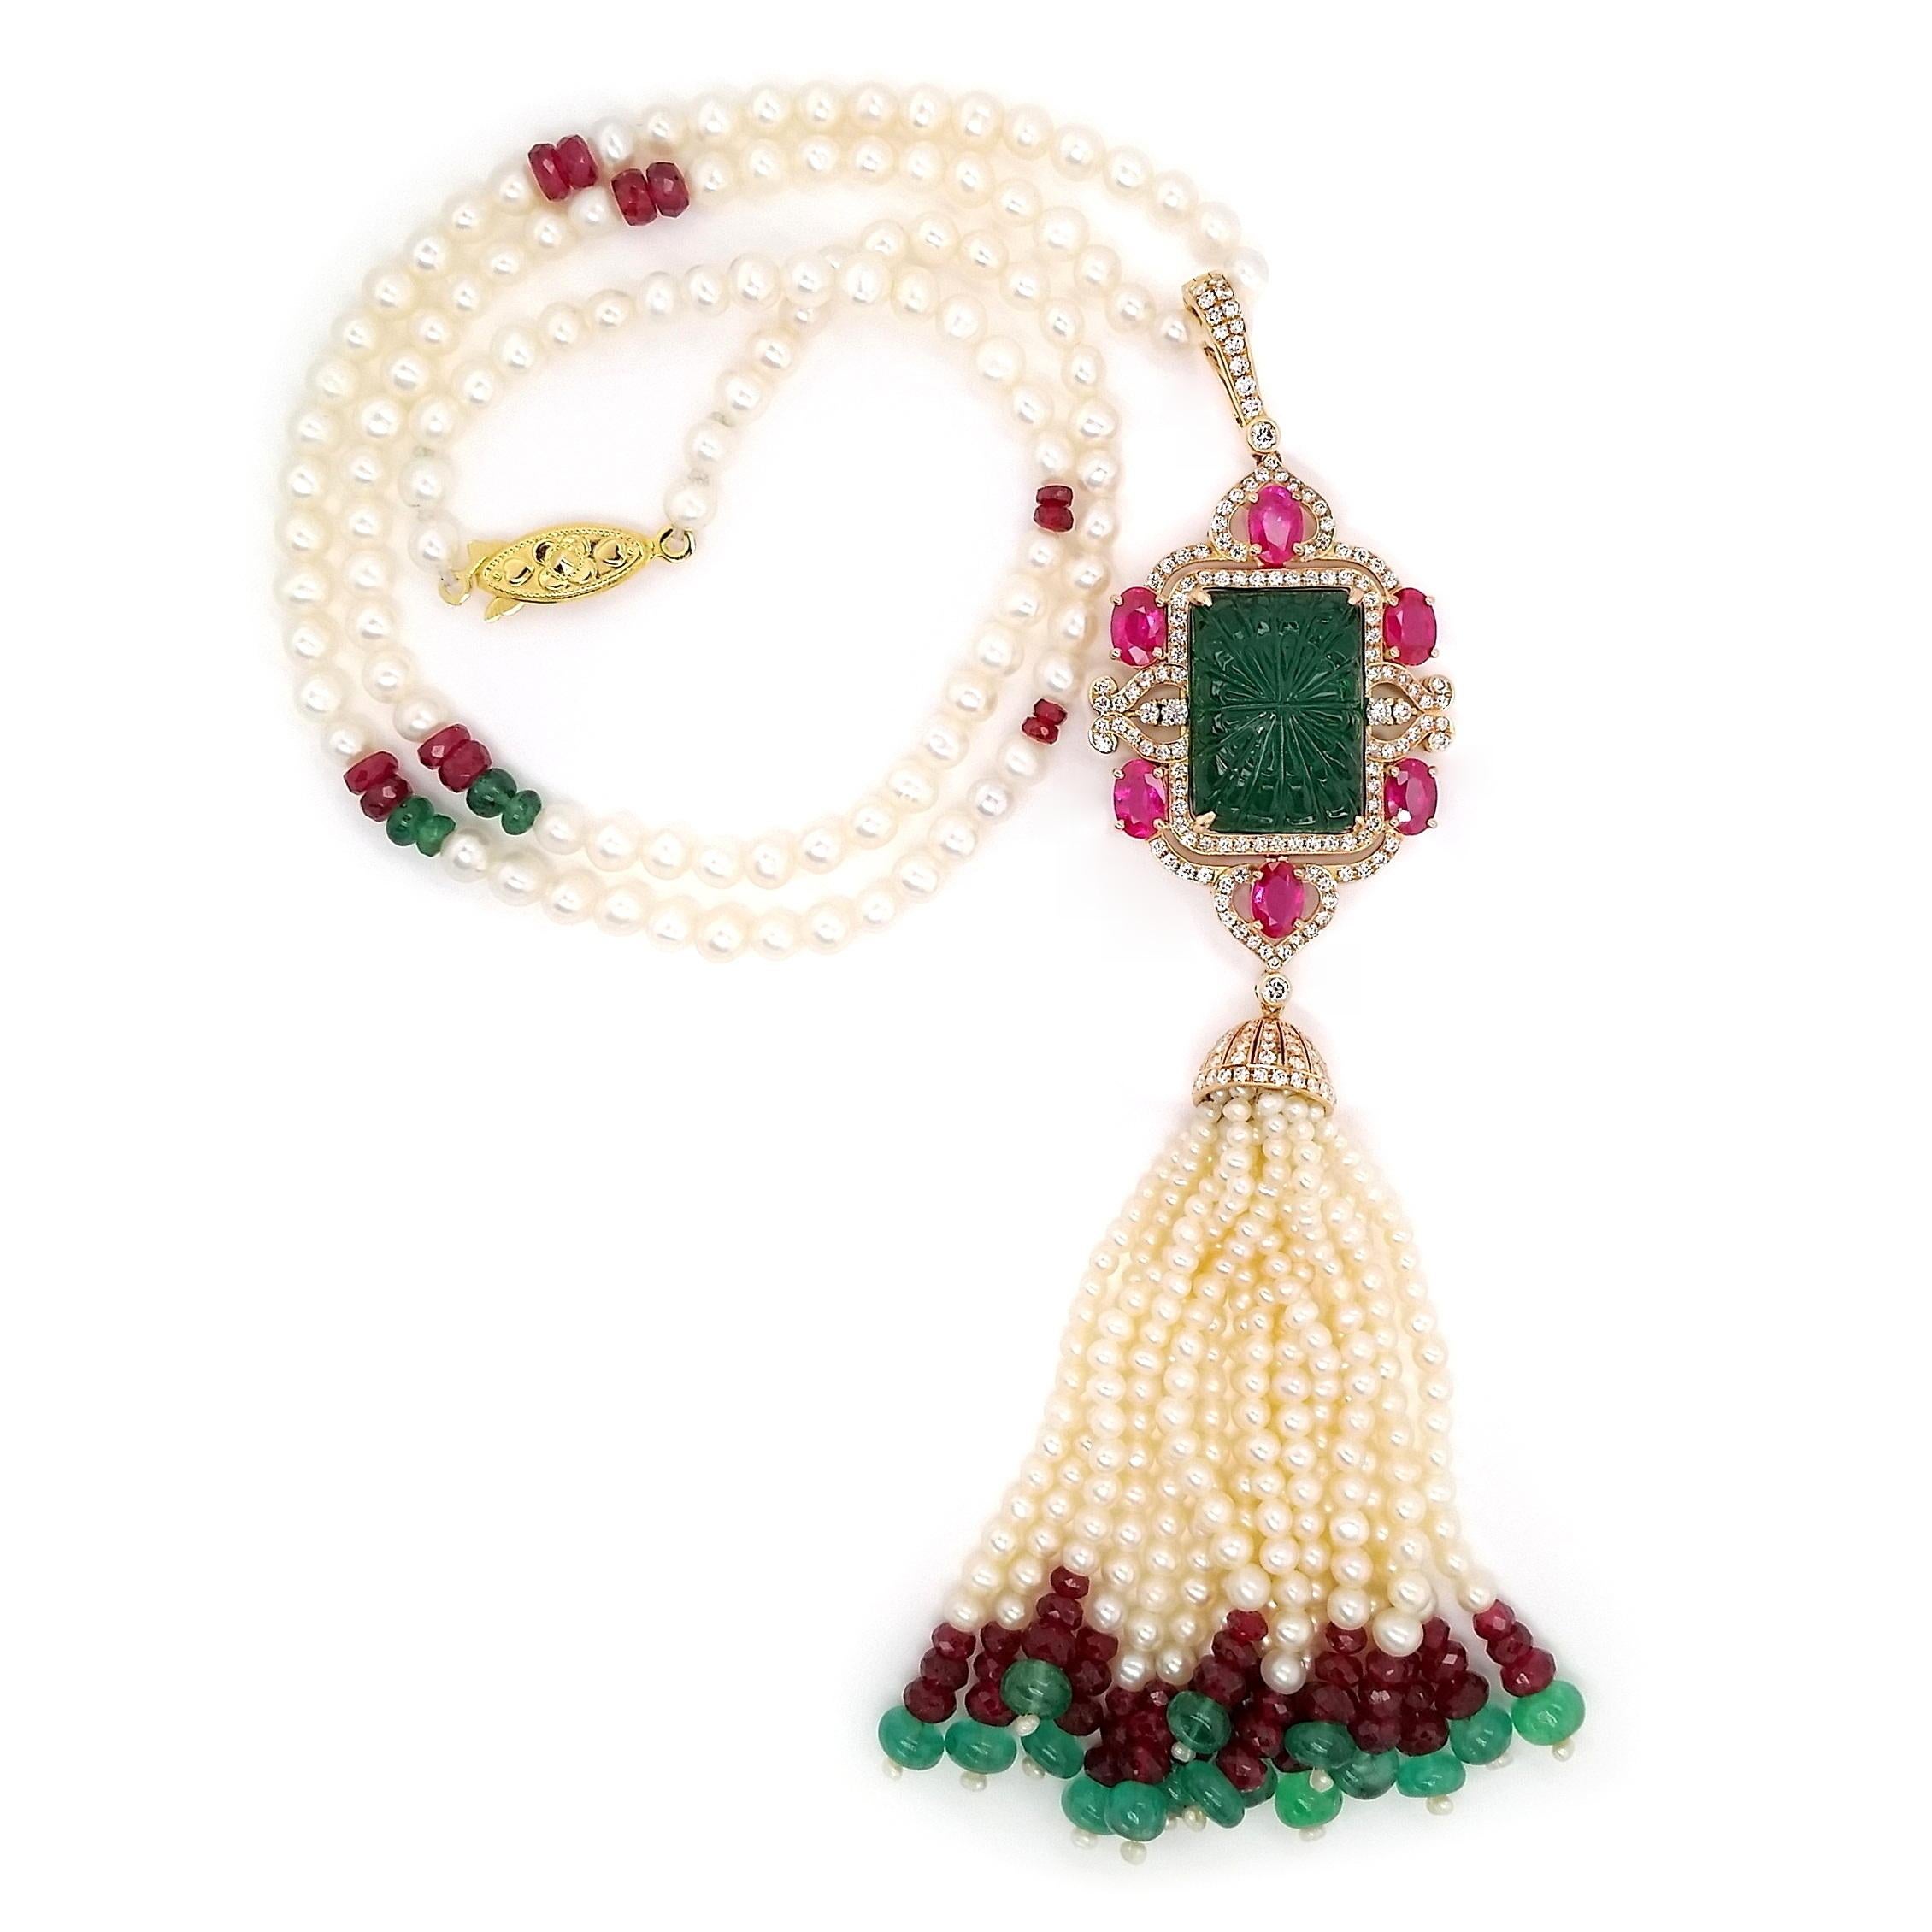 Experience true magnificence with this extraordinary 50cm necklace, set in an 18K pink and yellow gold masterpiece. A 16-carats rectangular intense bluish-green emerald takes center stage, surrounded by oval rubies in vivid pink-red, 414